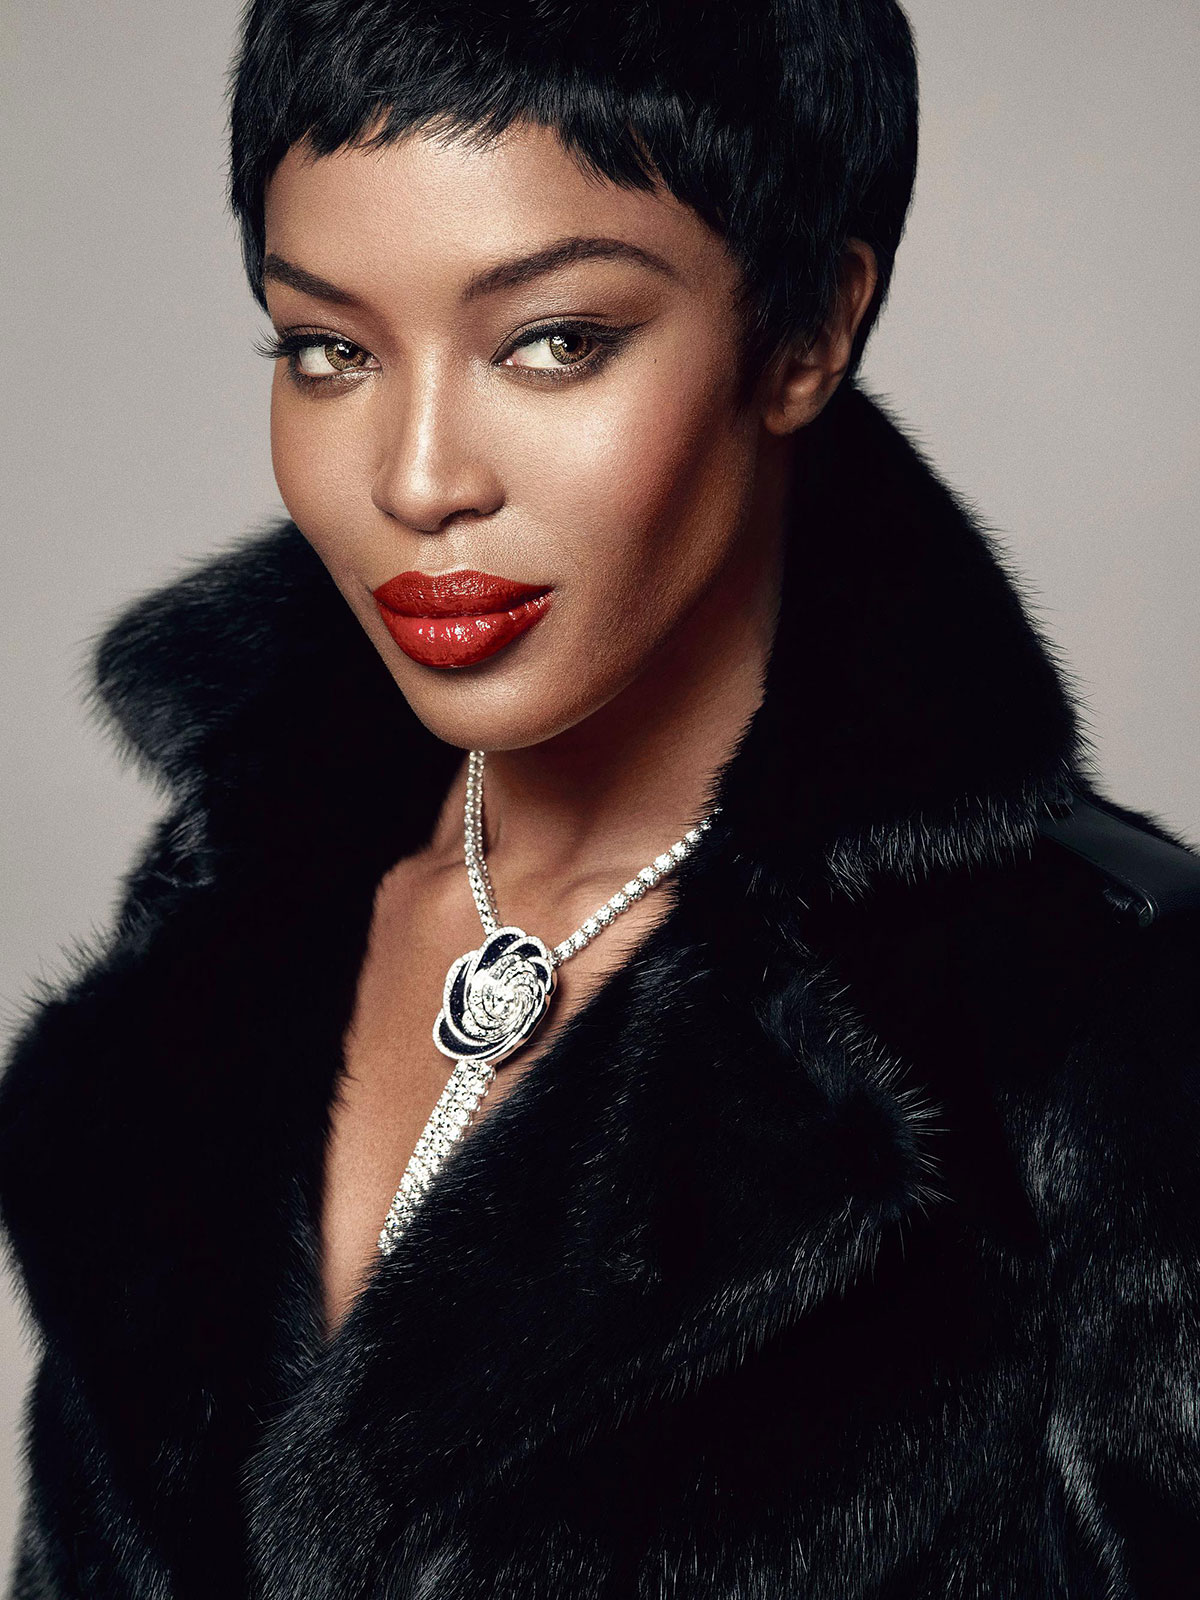 NAOMI CAMPBELL in Madame Figaro, December 2014 Issue ...